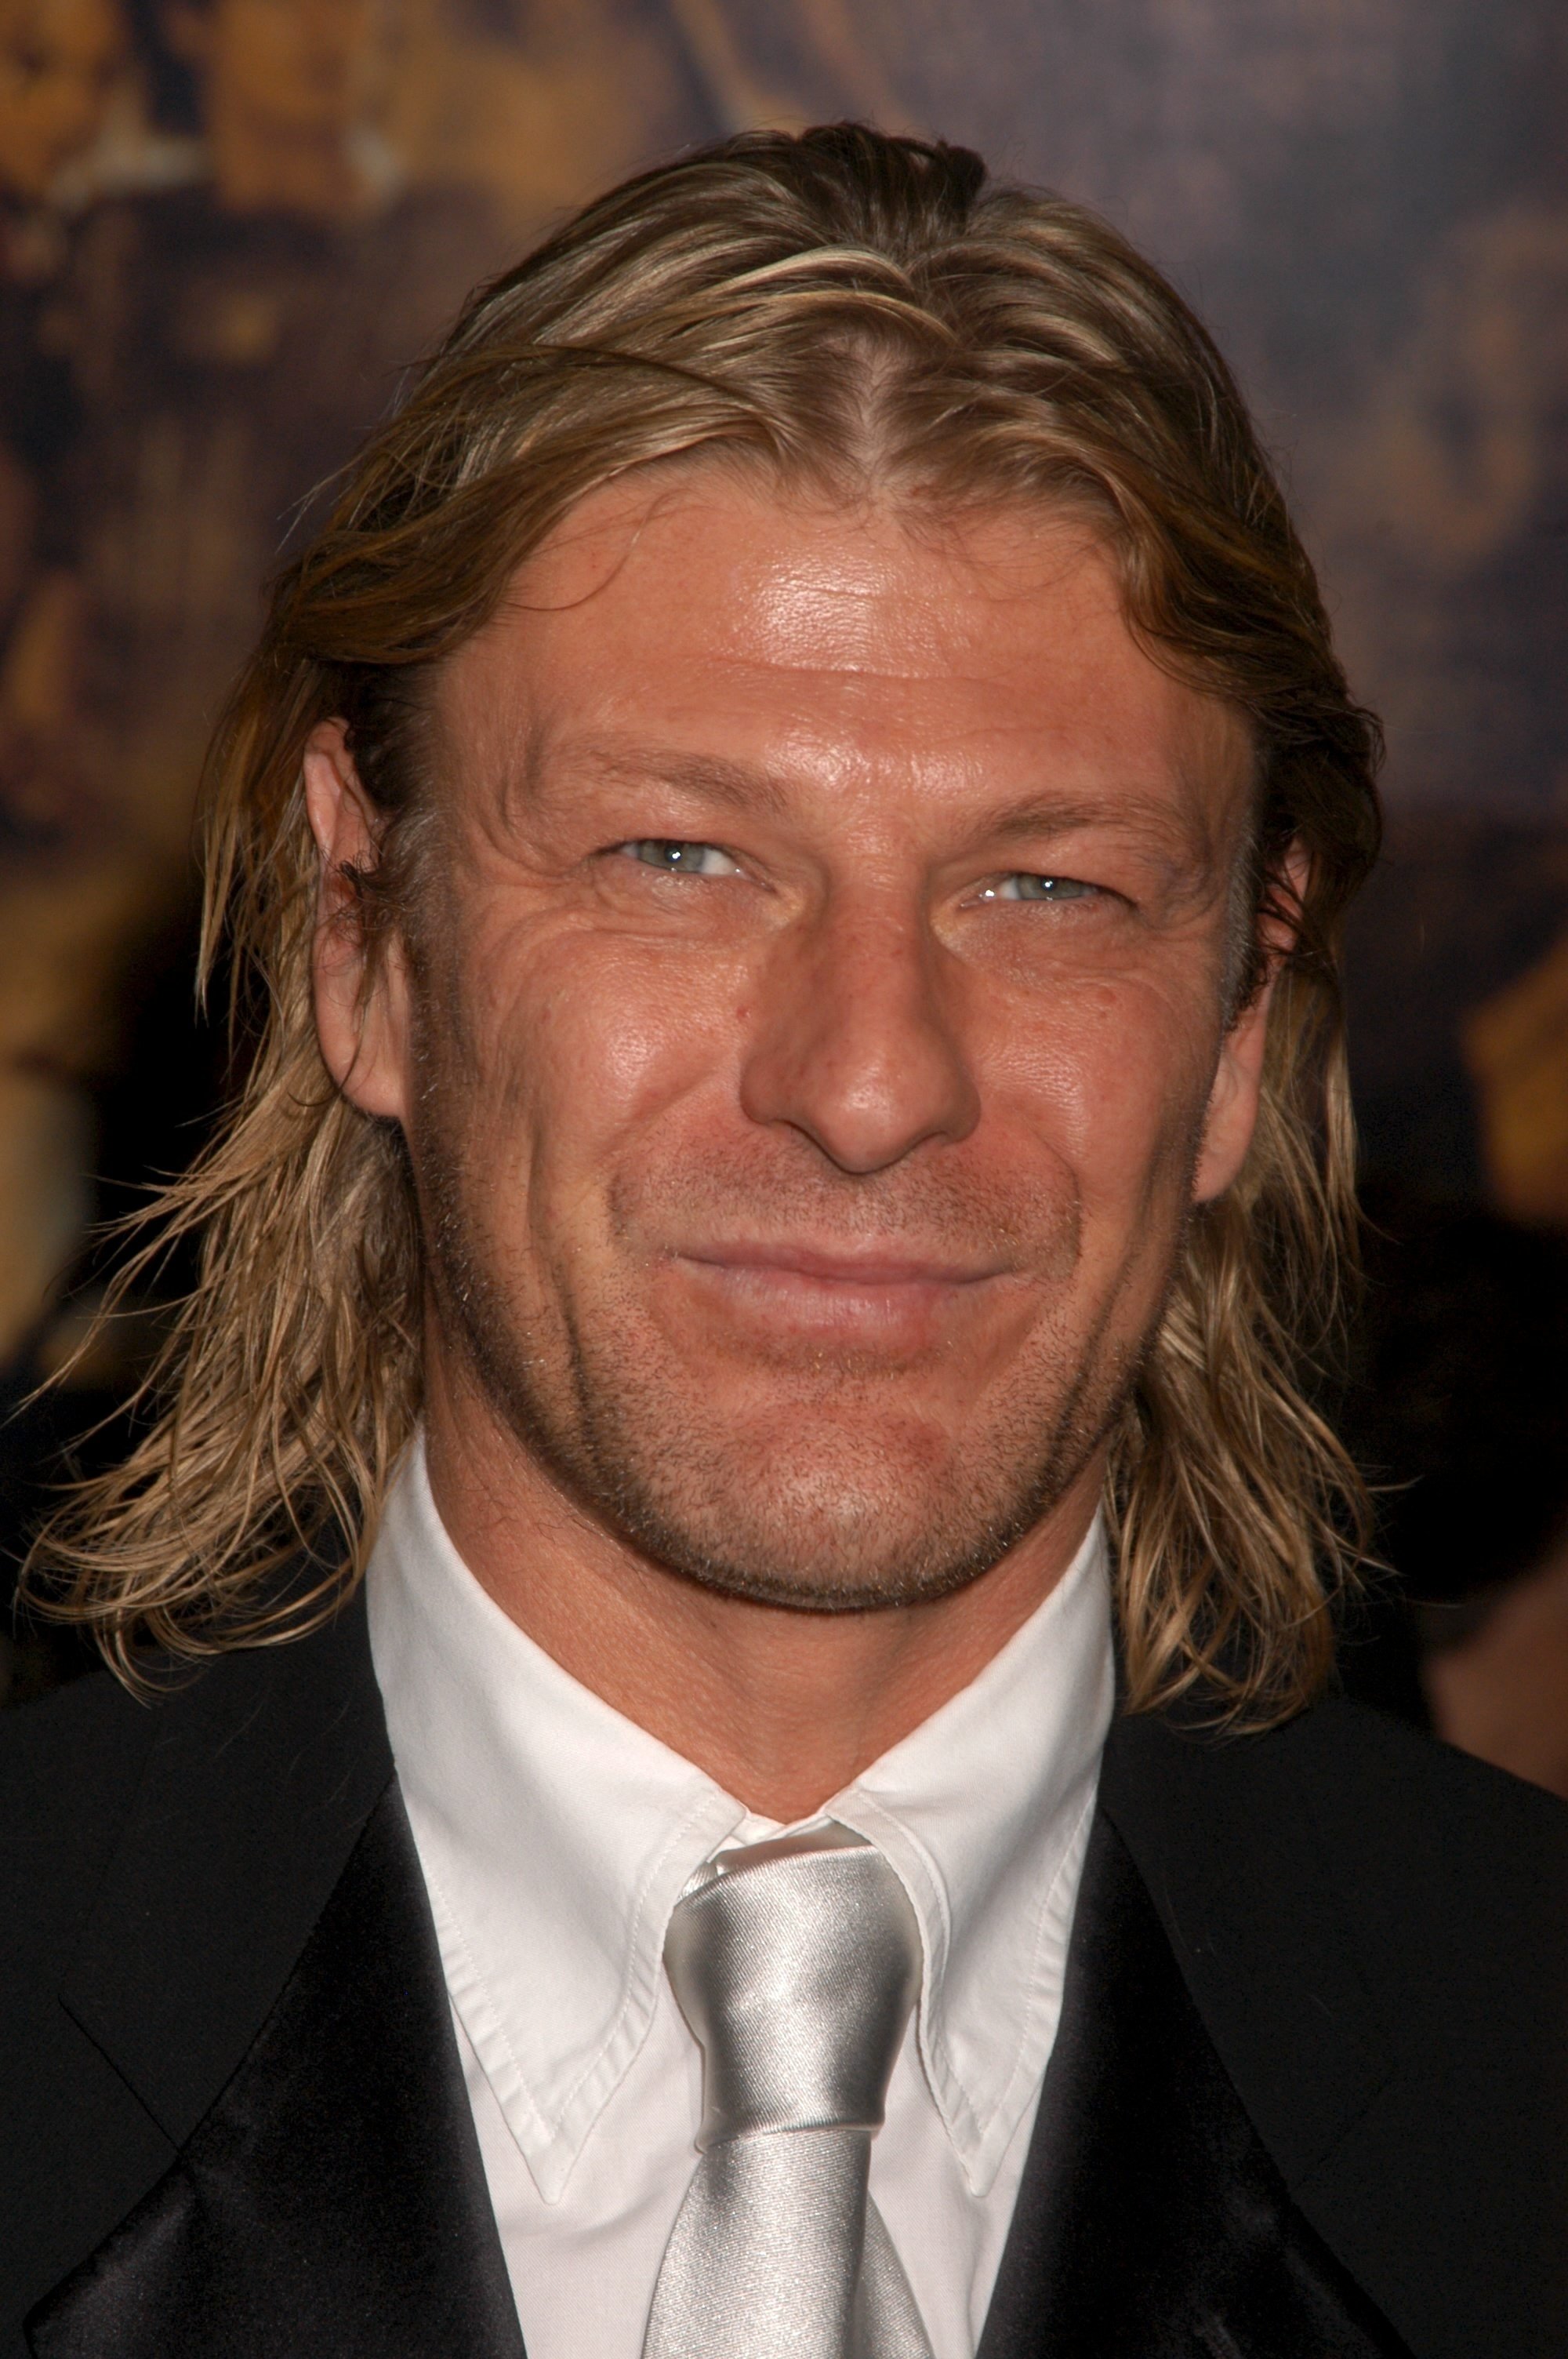 Sean Bean at the 2004 premiere of "Troy," at the Ziegfeld Theater in New York City. | Source: Getty Images